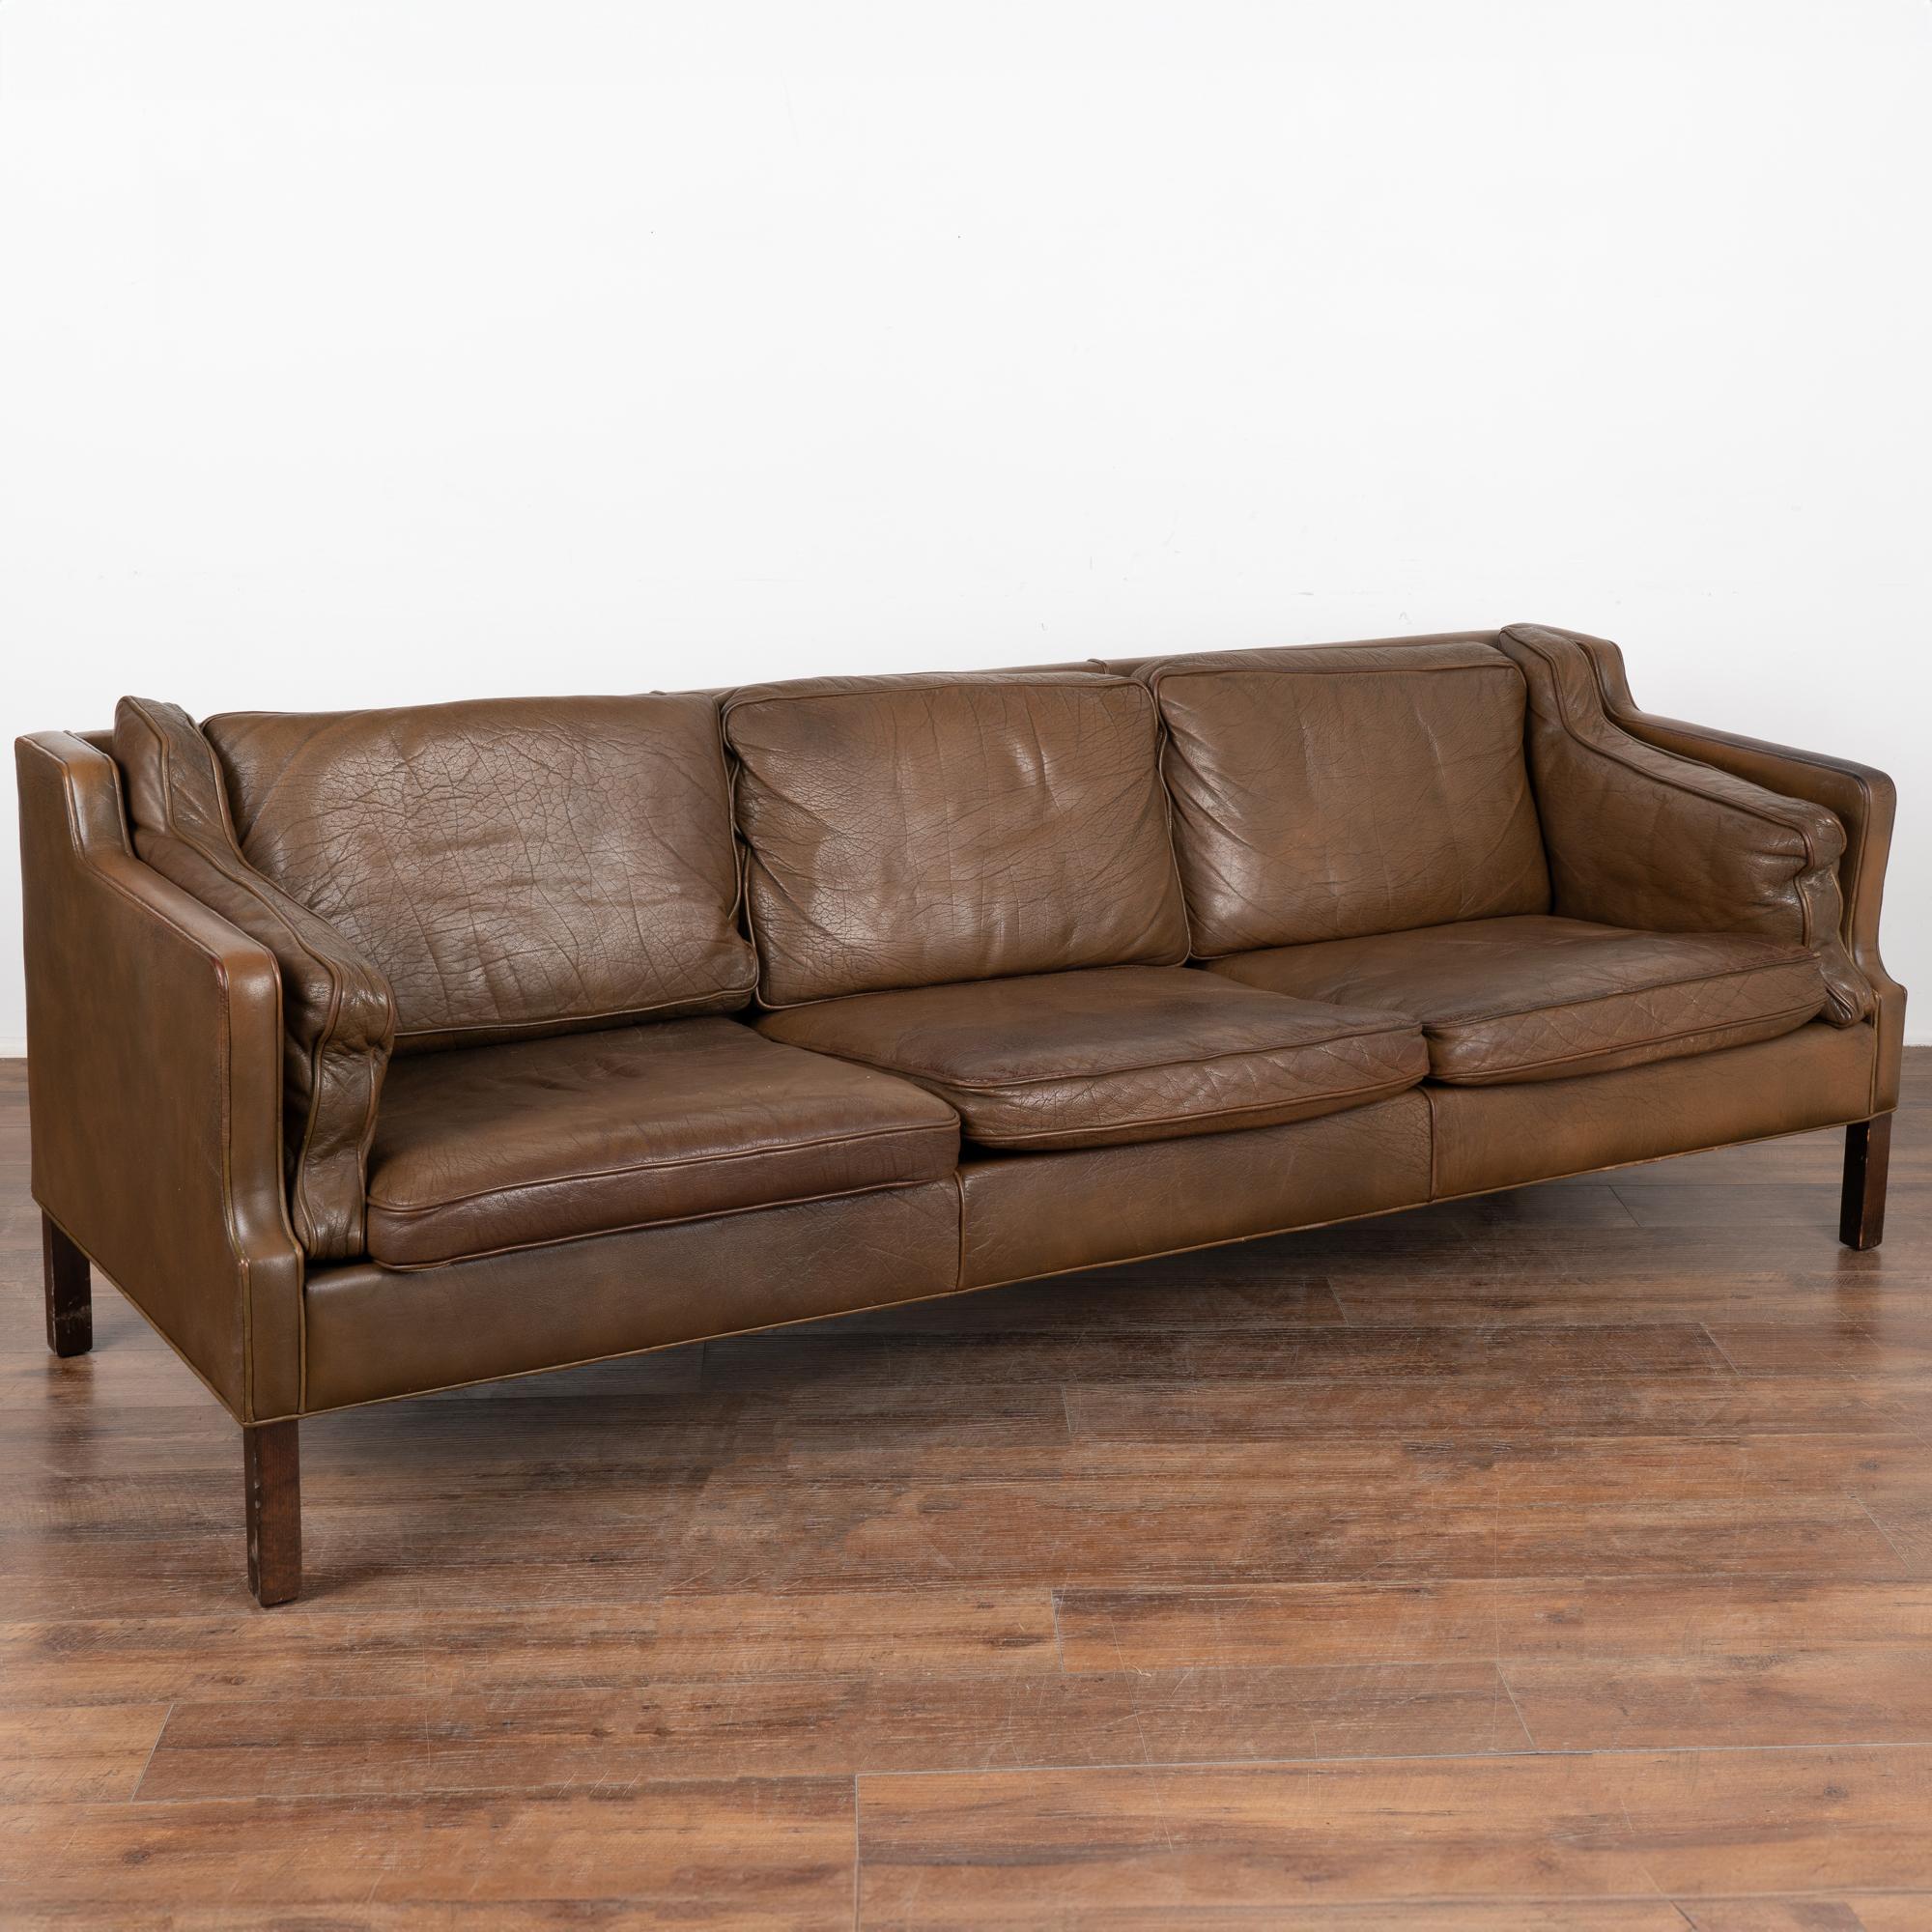 Mid-century modern brown leather three-seat sofa with removable cushions and hard wood frame.
The years of use are revealed in the aged patina of the leather, including impressions, scuffs/scratches, some discoloration, stains on cushions, multiple